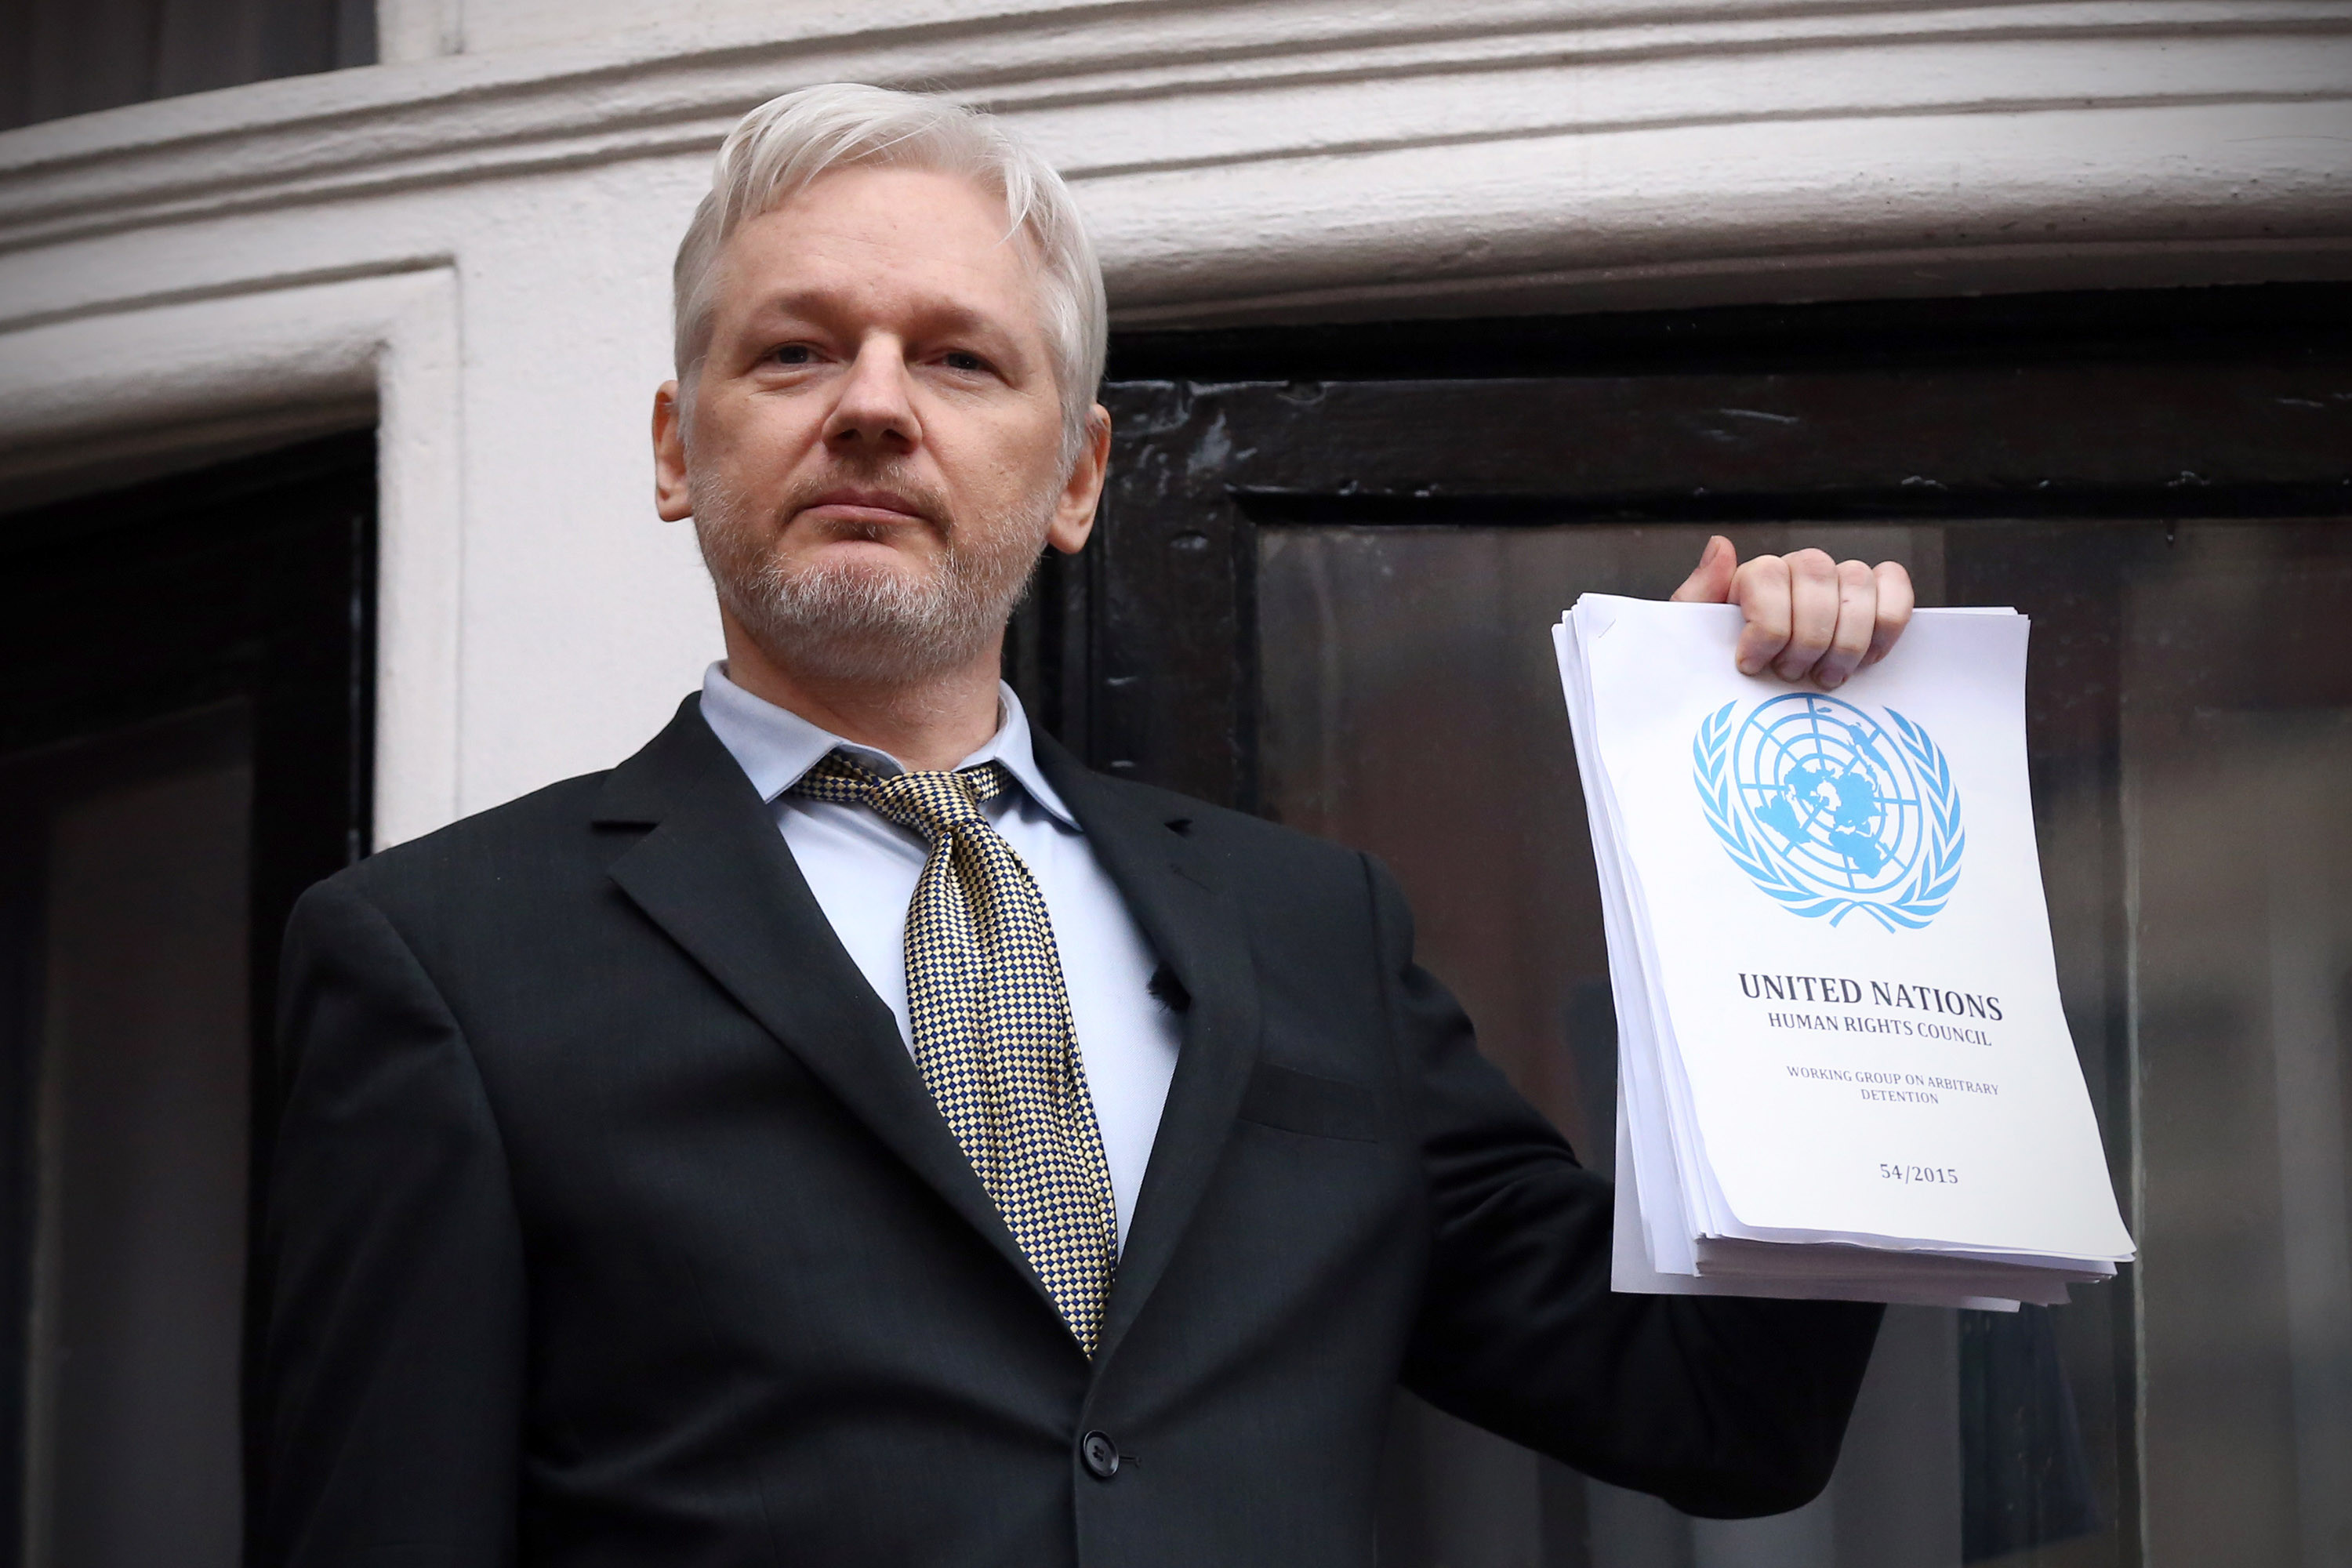 3000x2000 WikiLeaks hates what Clinton stands for